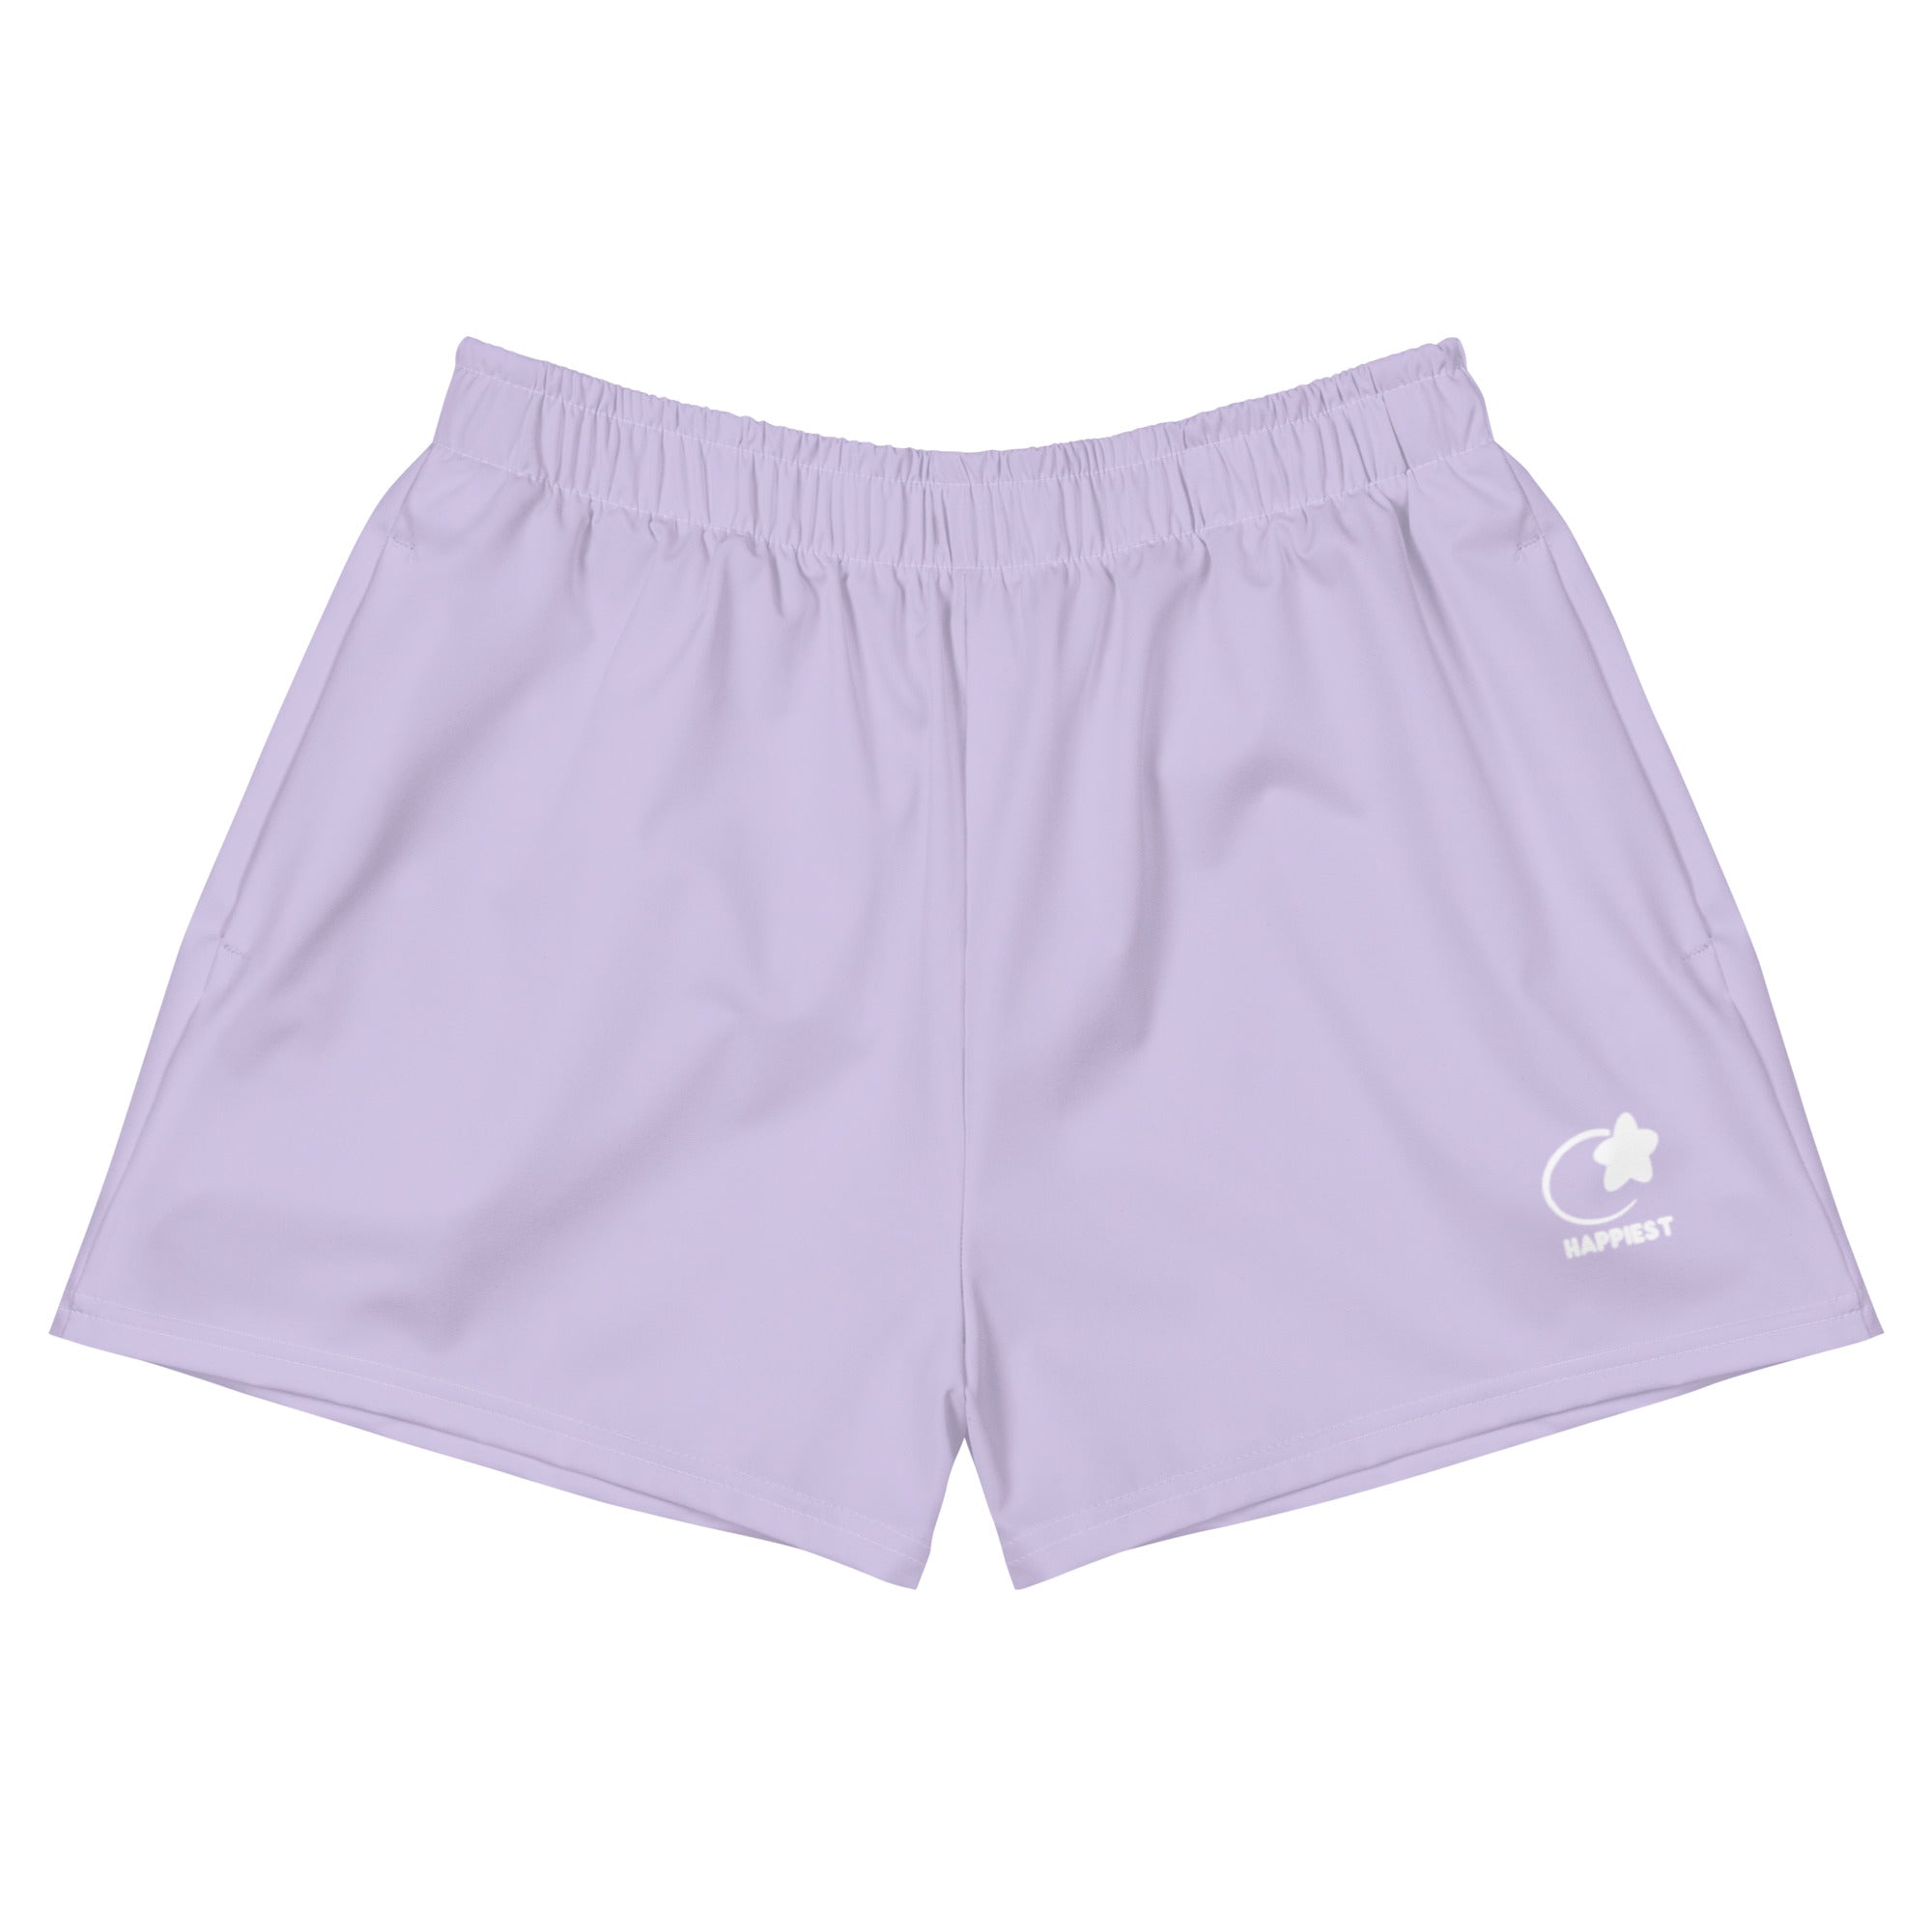 Lavender Women’s Recycled Athletic Shorts